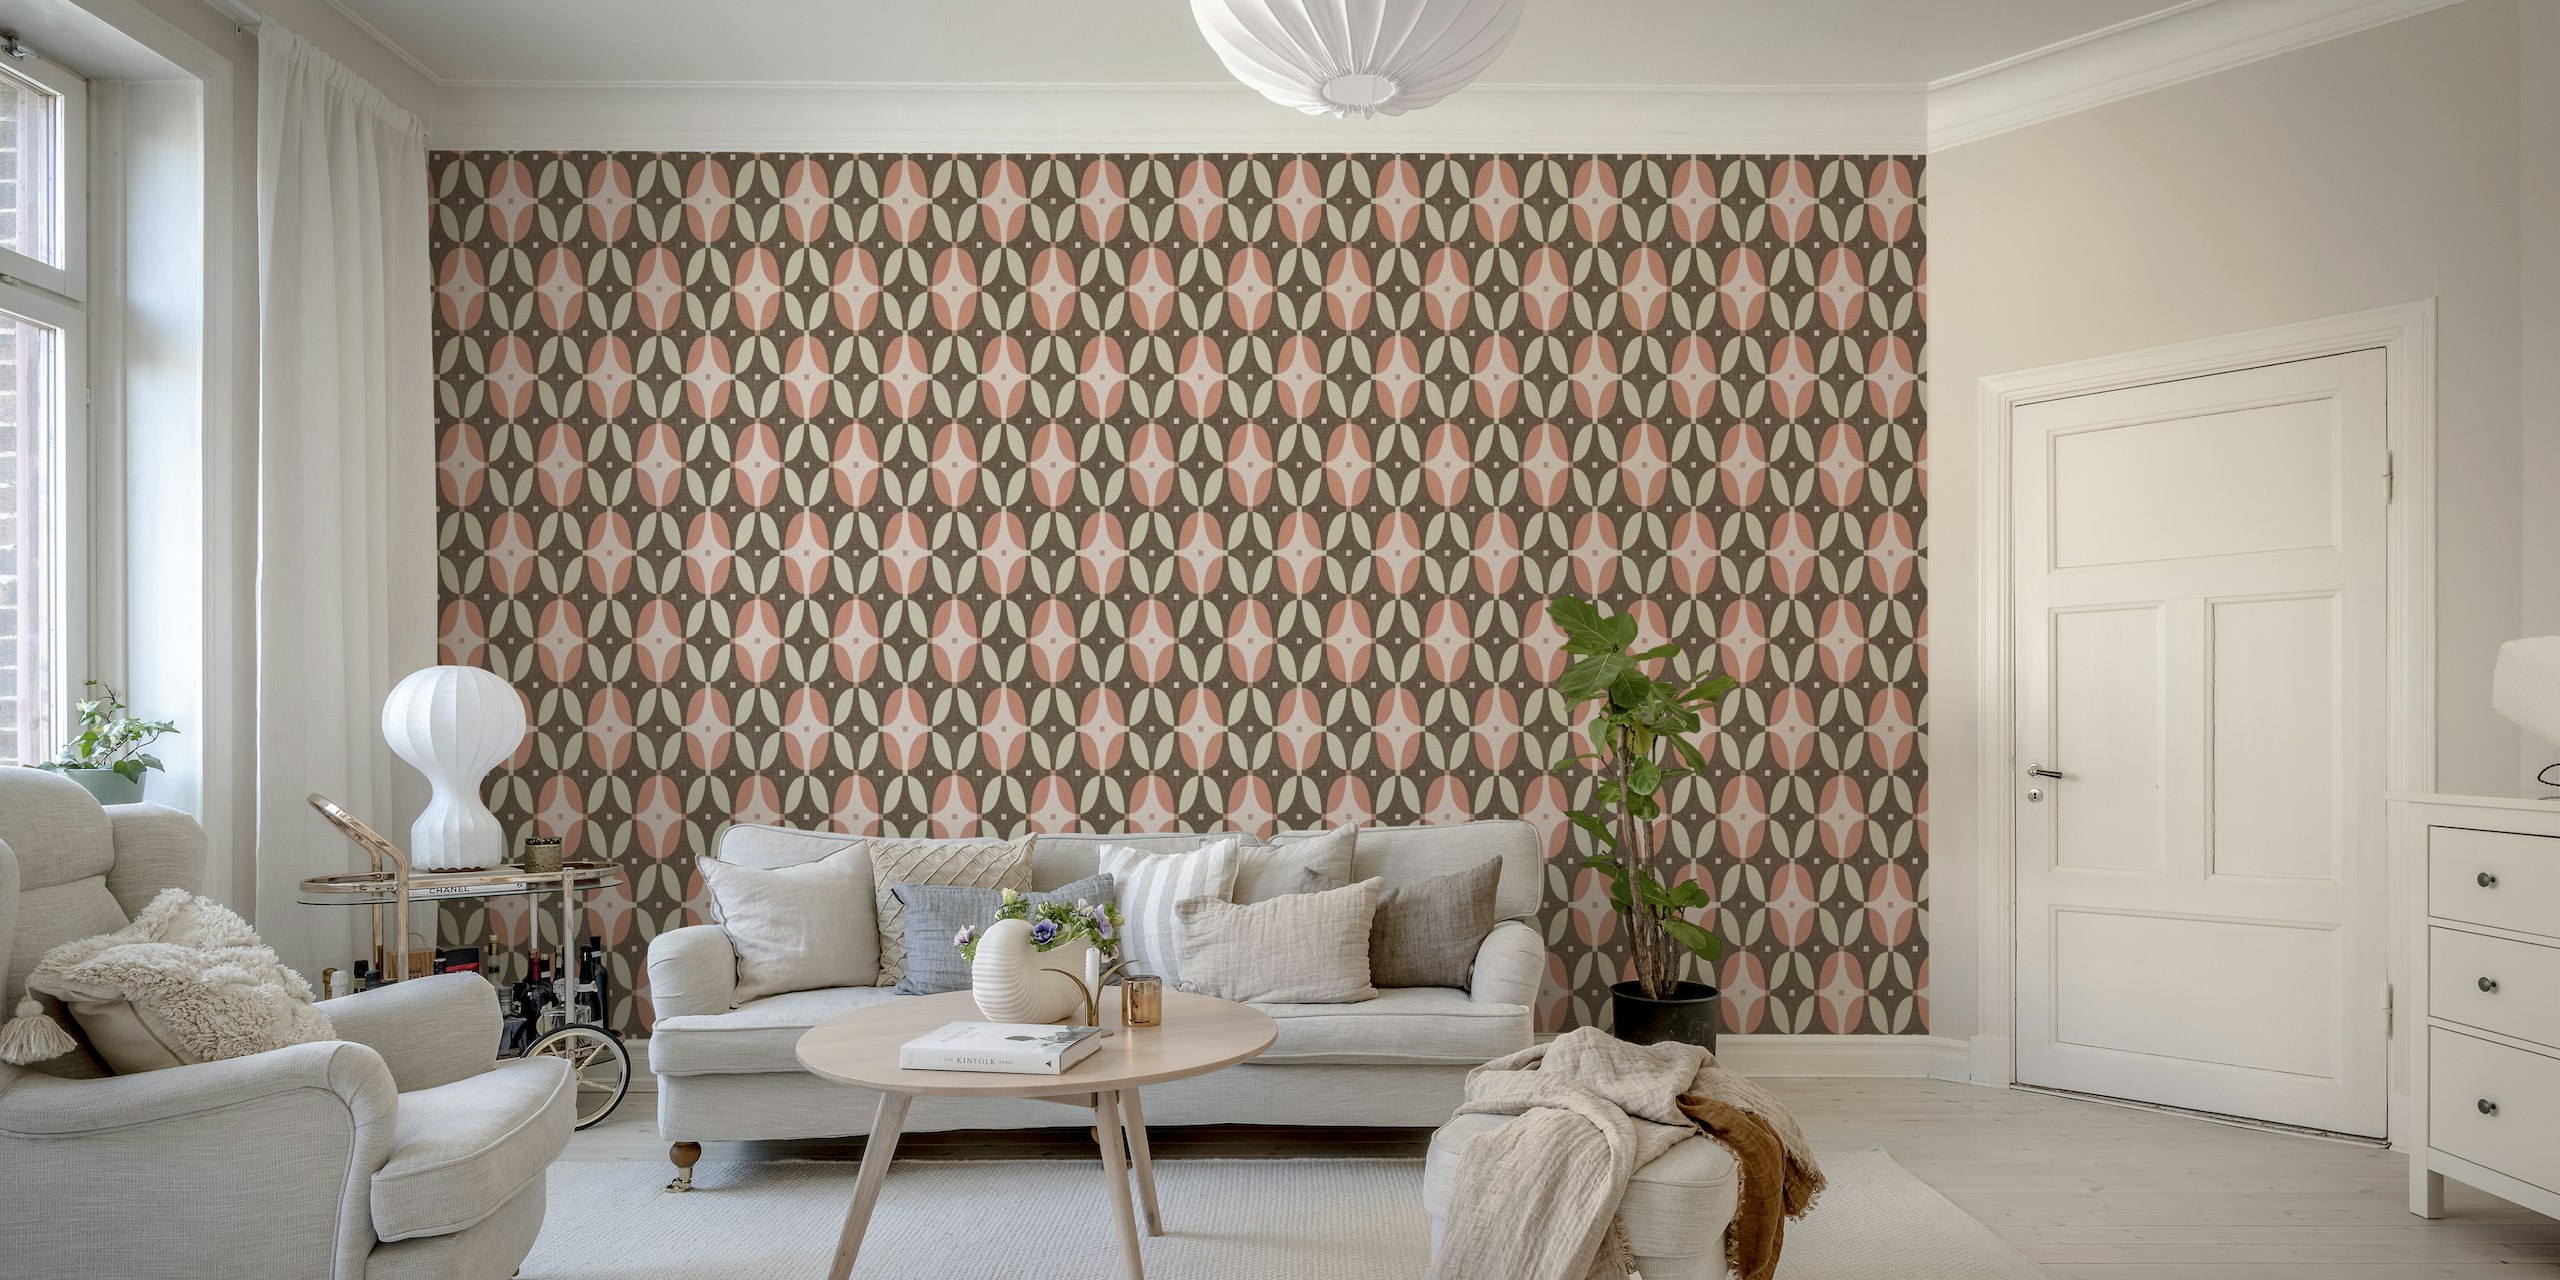 Retro oval geometric pattern in brown and peach in wall mural form